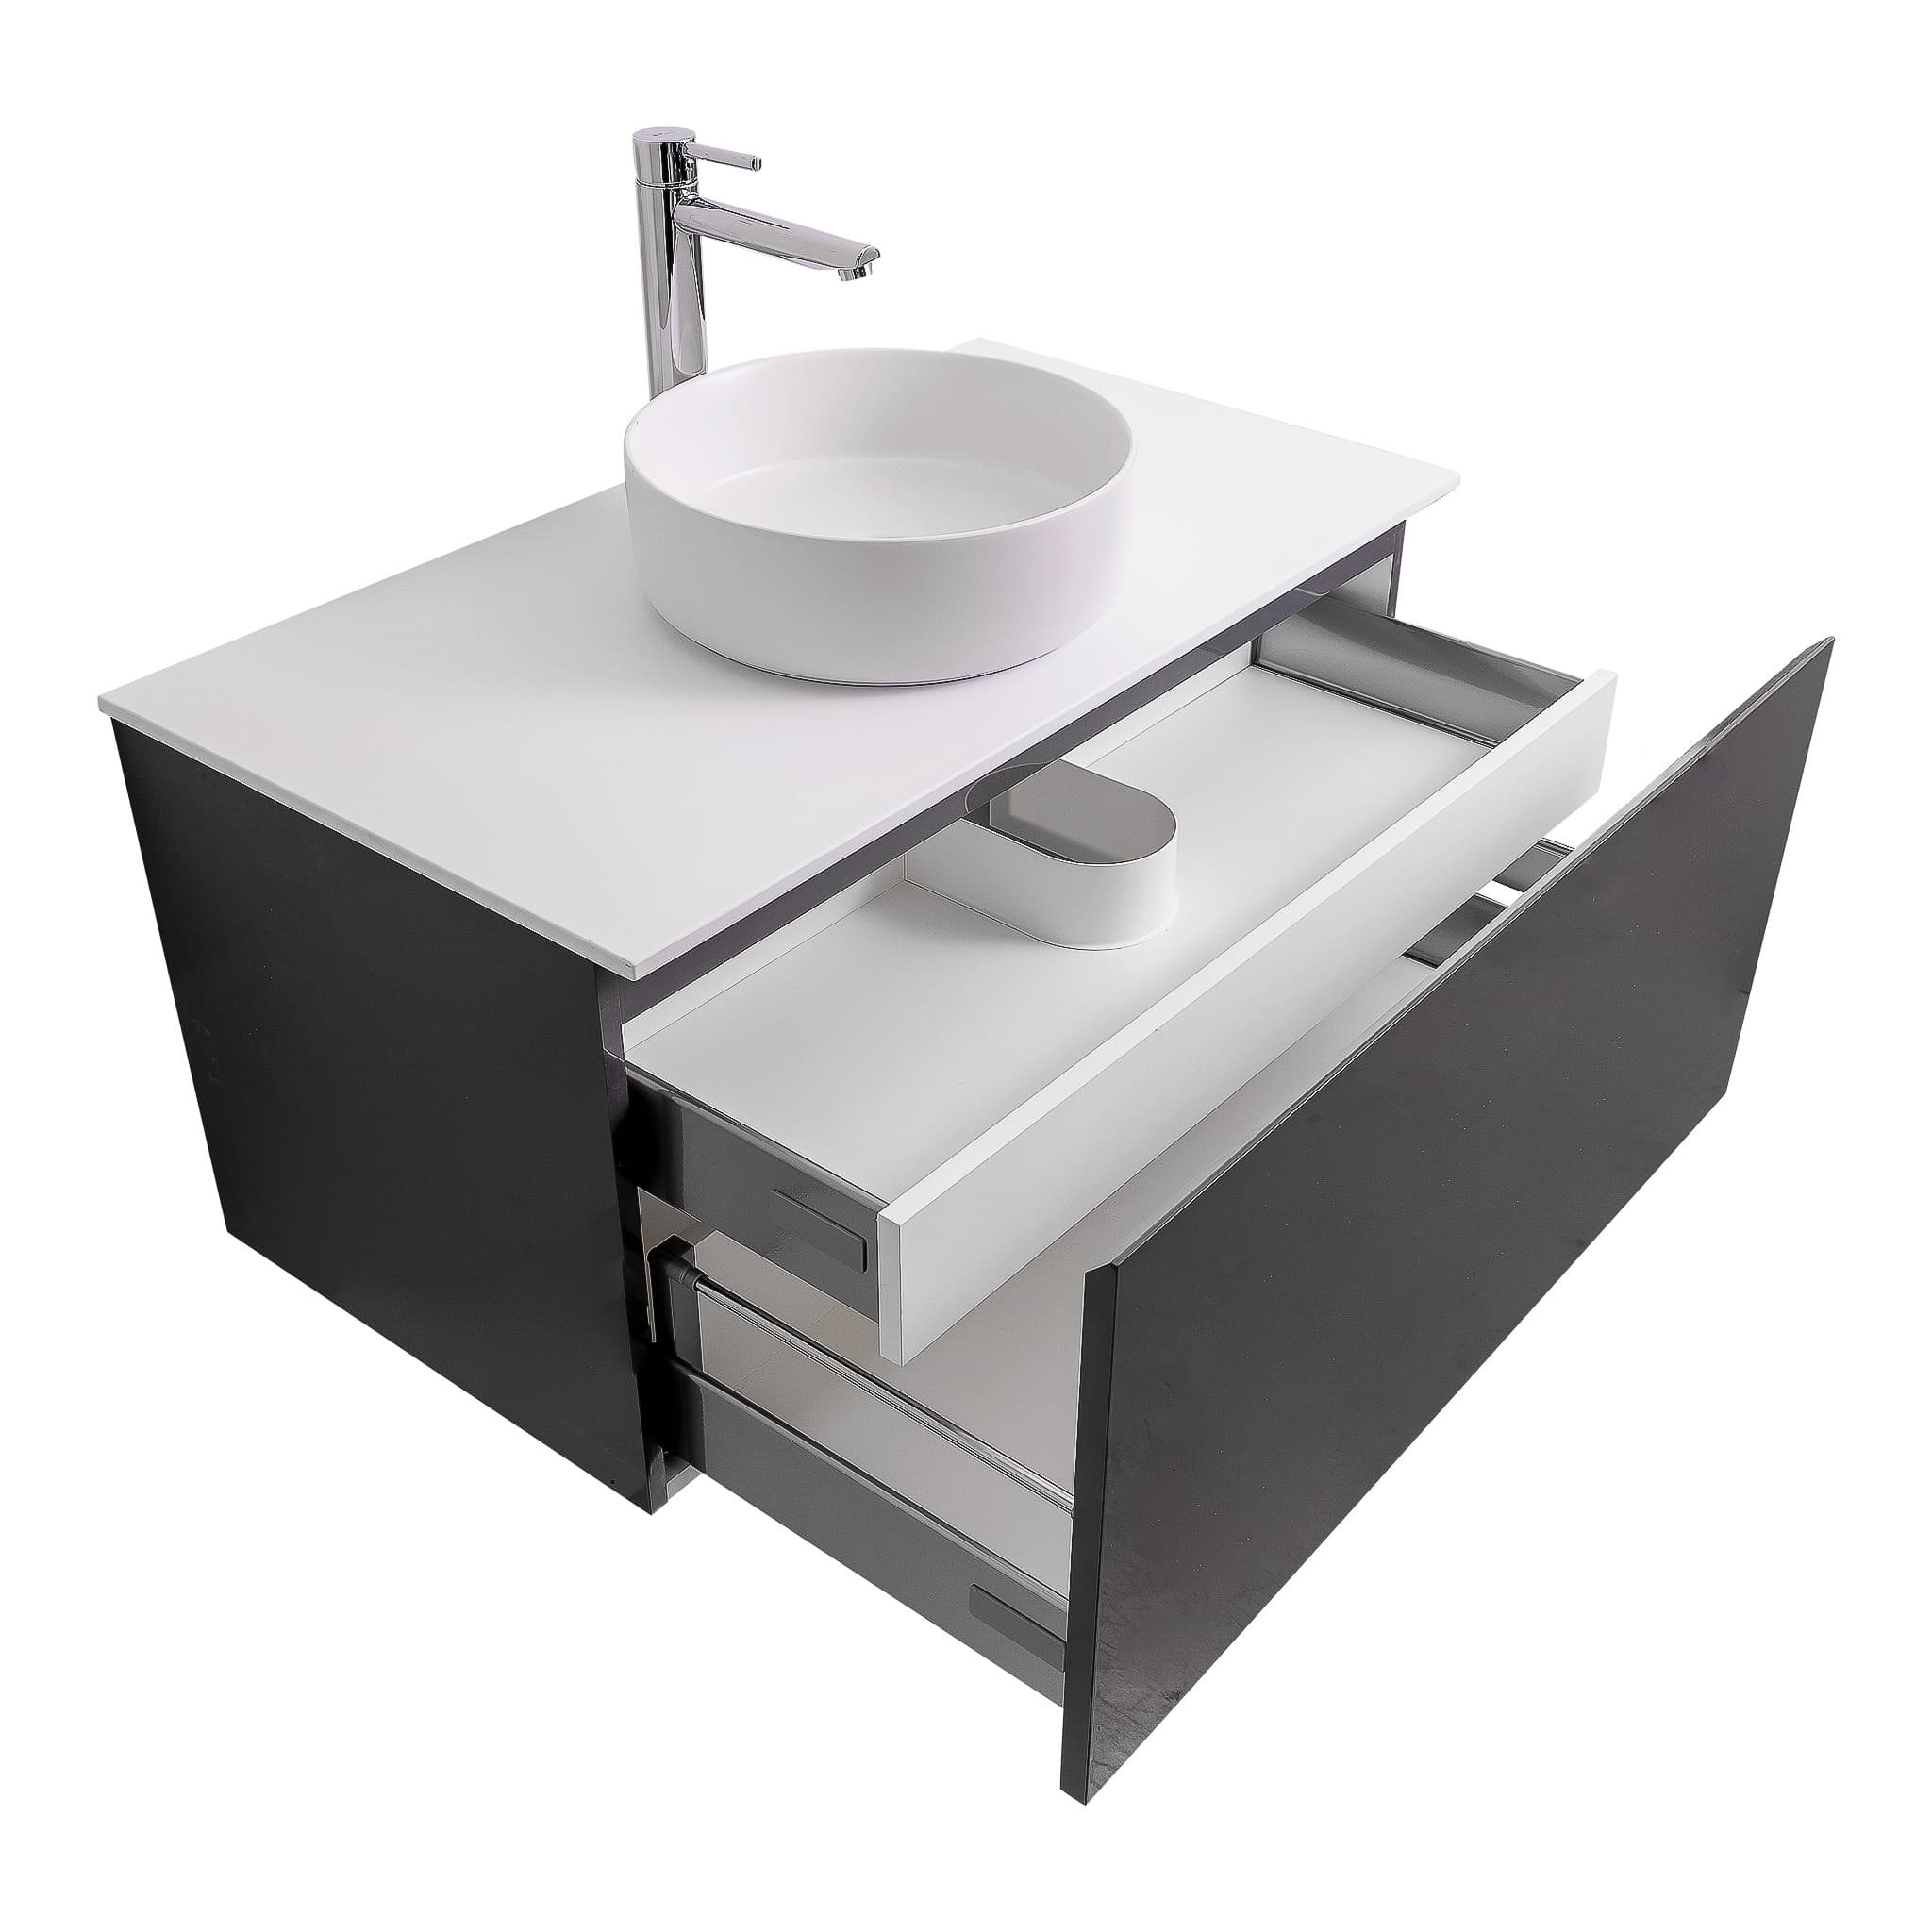 Venice 35.5 Anthracite High Gloss Cabinet, Ares White Top And Ares White Ceramic Basin, Wall Mounted Modern Vanity Set